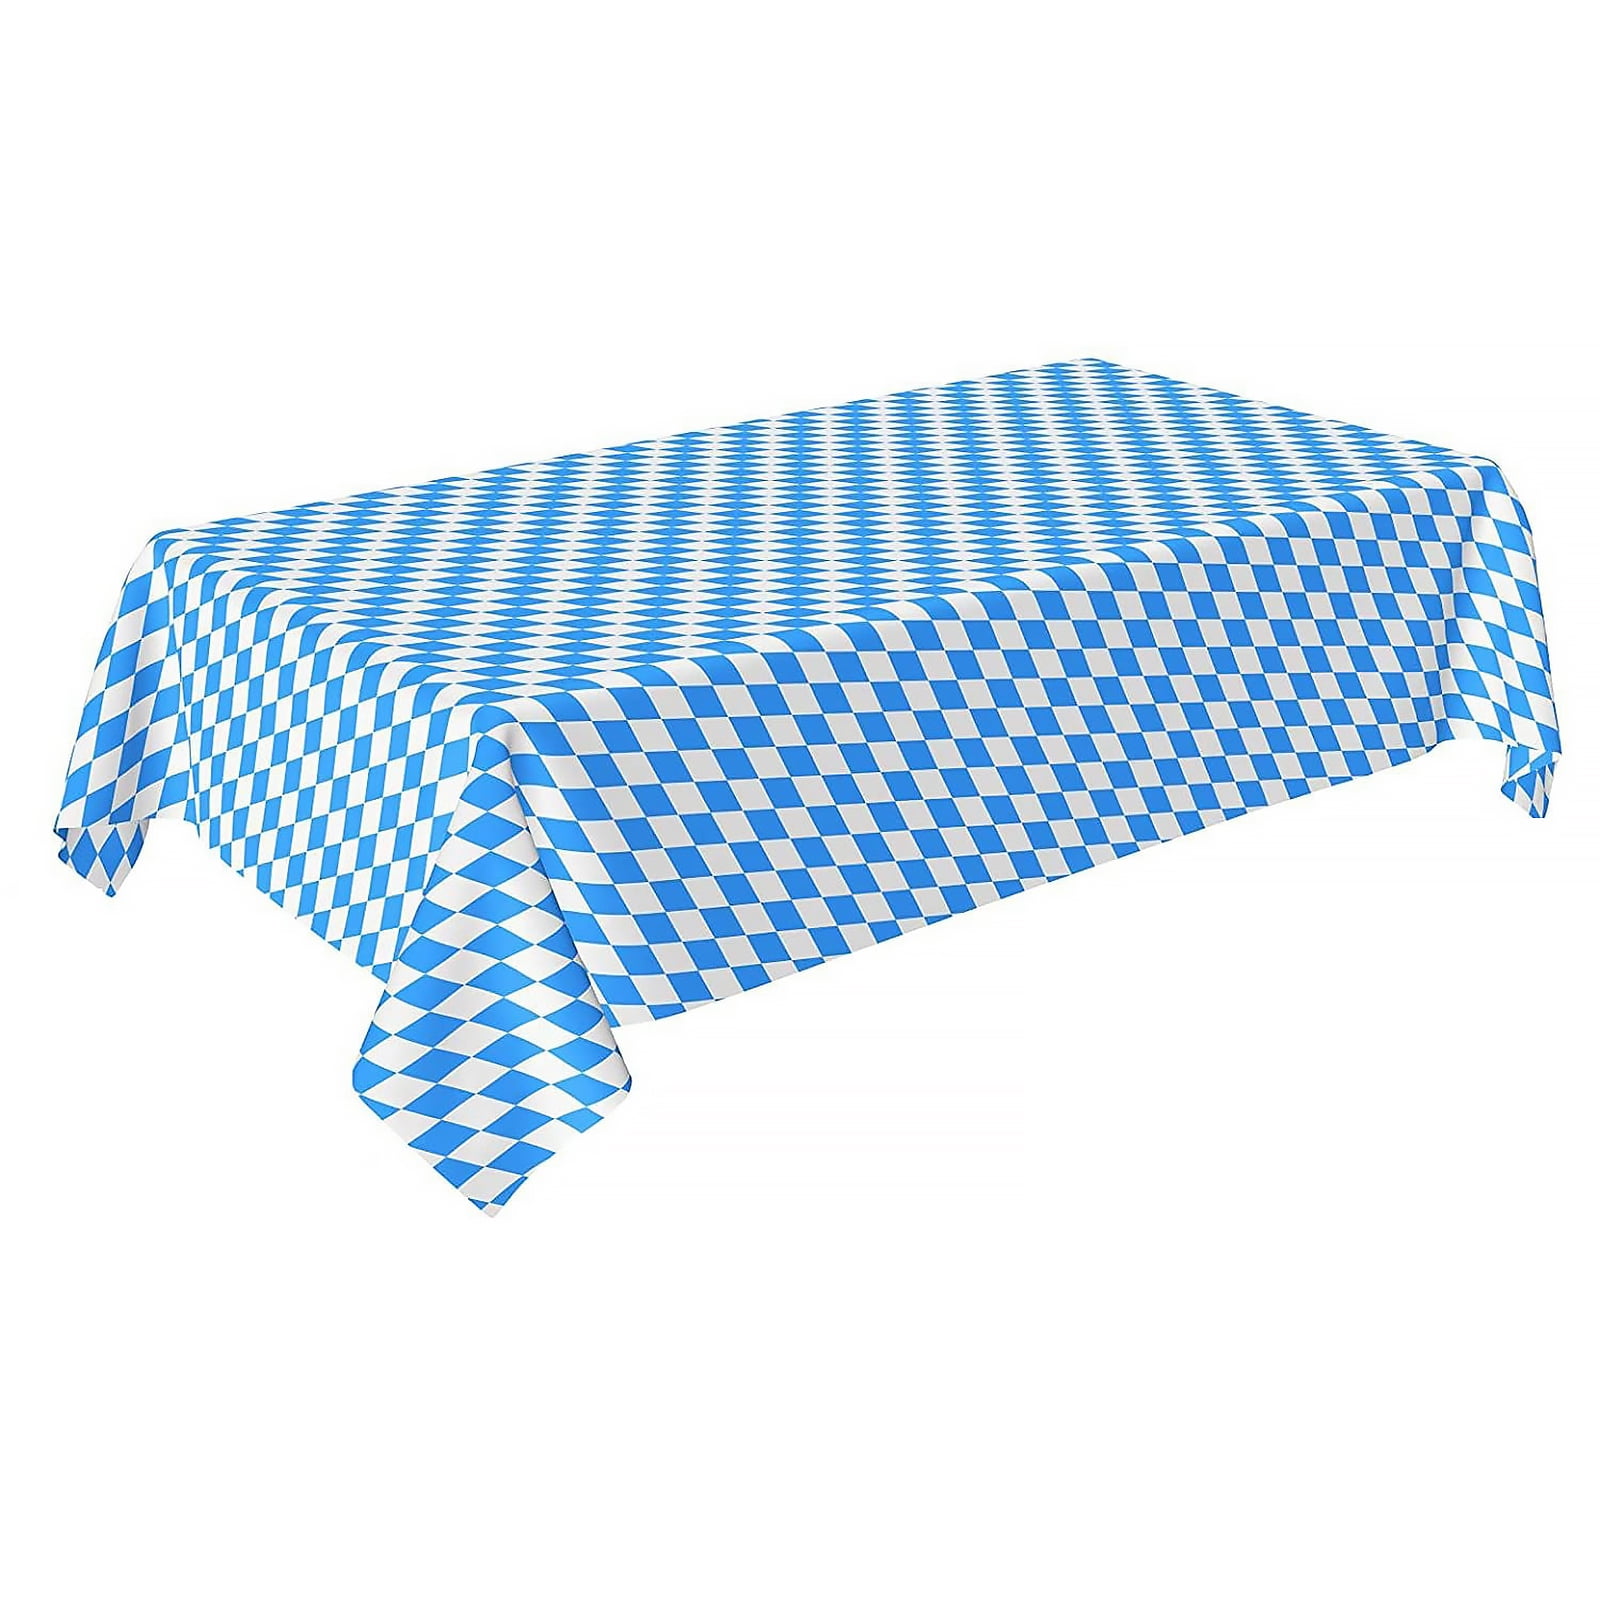 2 Pcs Oktoberfest Tablecloth 128 275CM Bavarian Flag Check Table Cloth Plastic Table Cover for Oktoberfest Party Decorations Bavarian Beer Party Favors Supplies